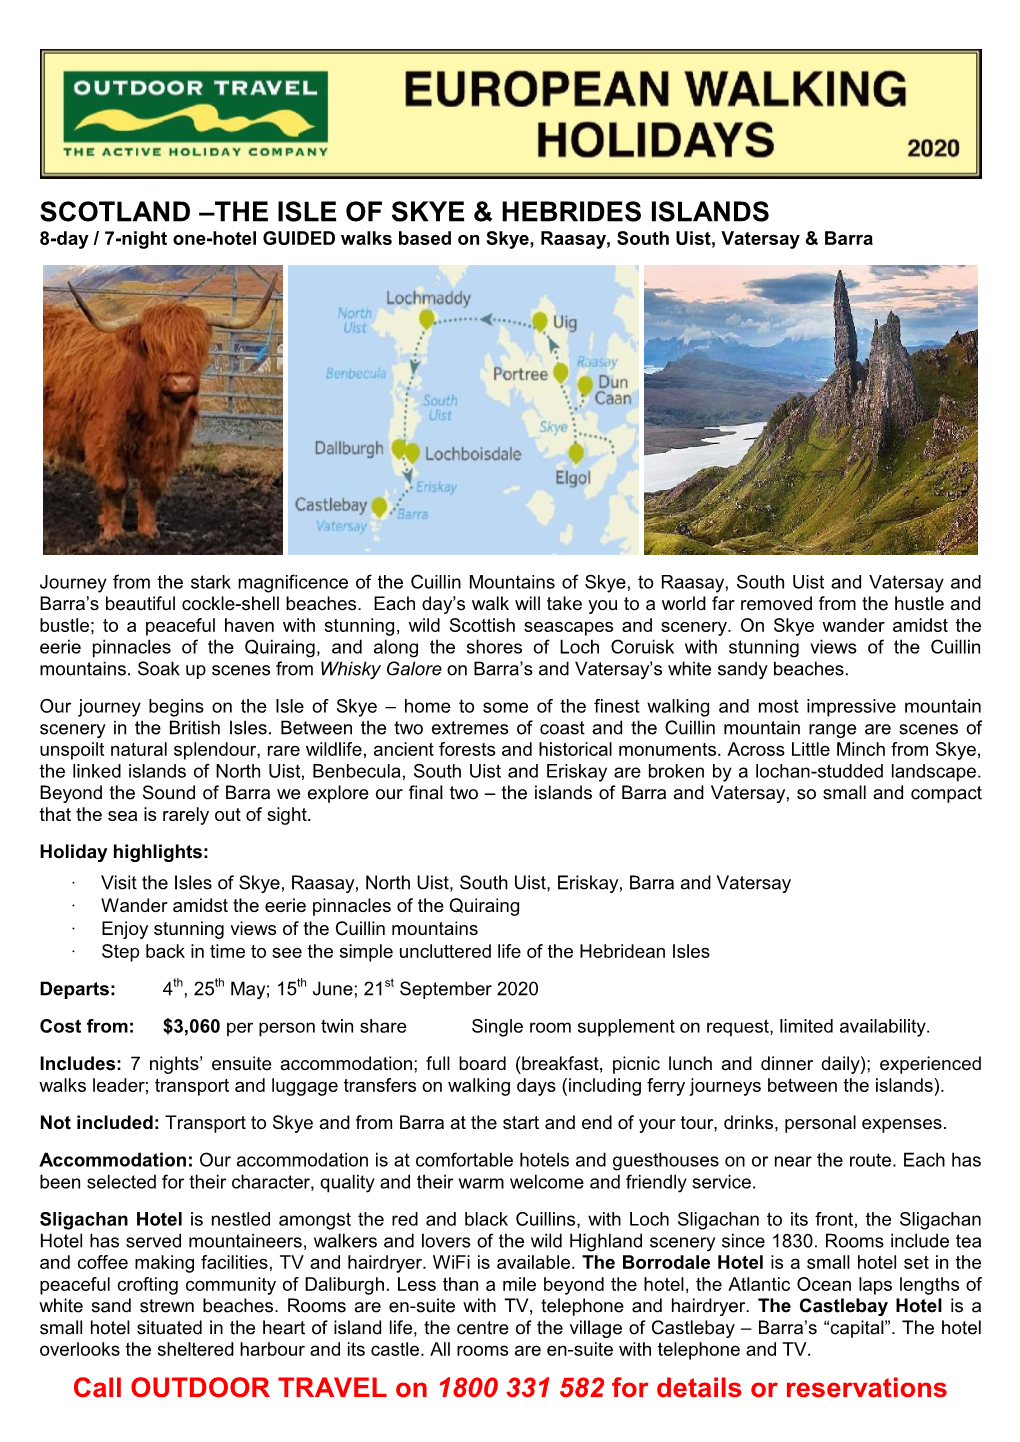 SCOTLAND –THE ISLE of SKYE & HEBRIDES ISLANDS 8-Day / 7-Night One-Hotel GUIDED Walks Based on Skye, Raasay, South Uist, Vatersay & Barra